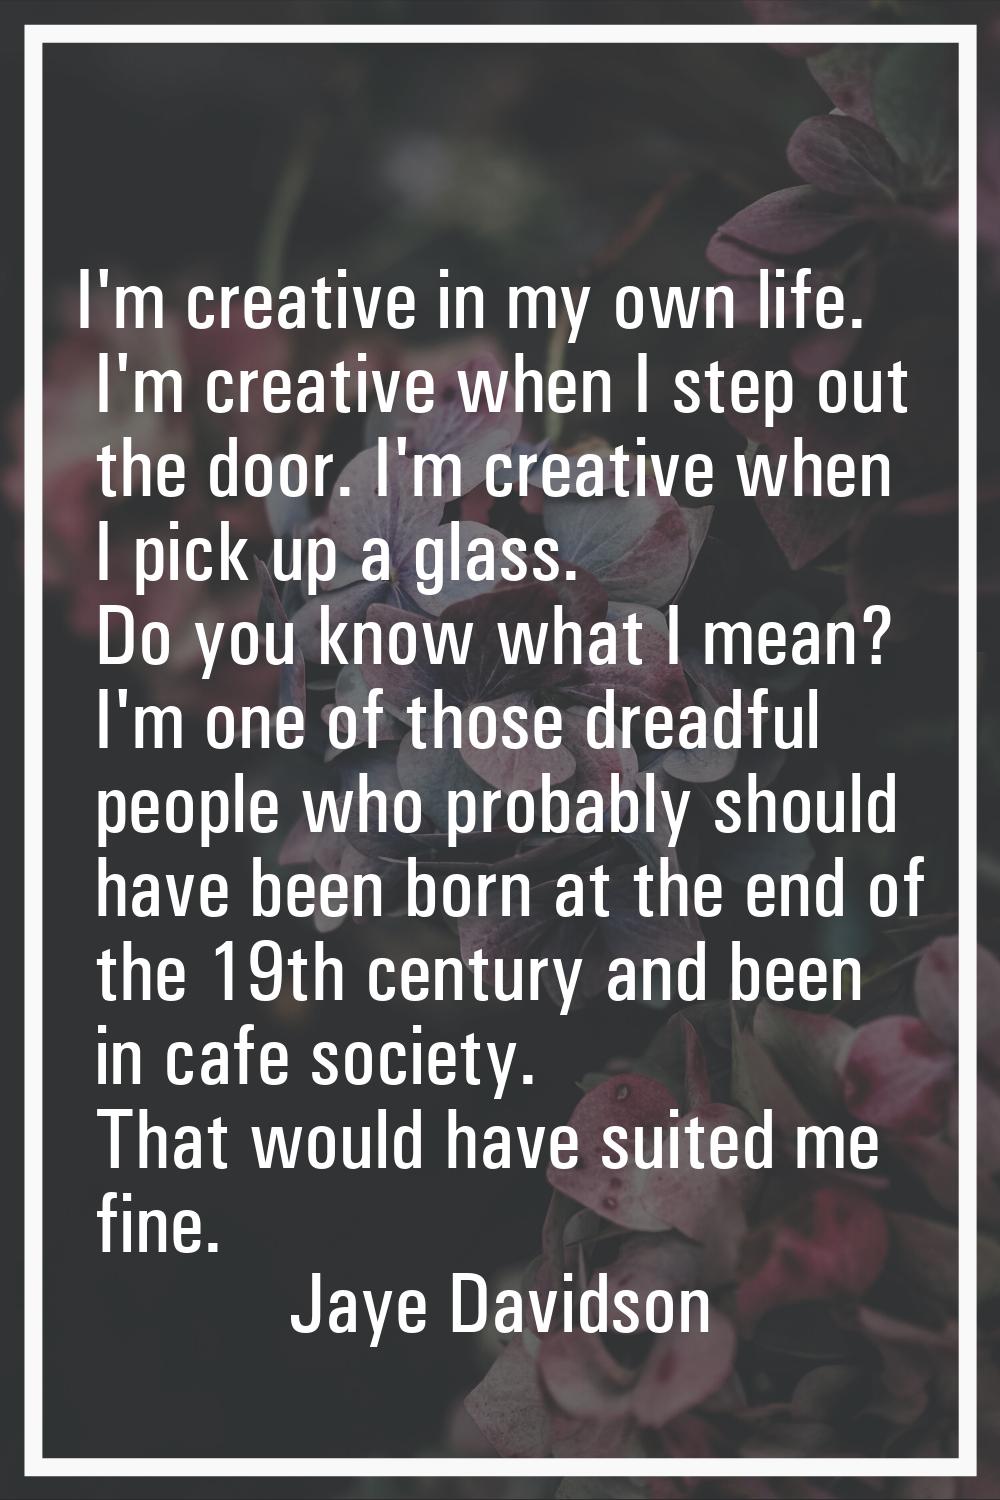 I'm creative in my own life. I'm creative when I step out the door. I'm creative when I pick up a g